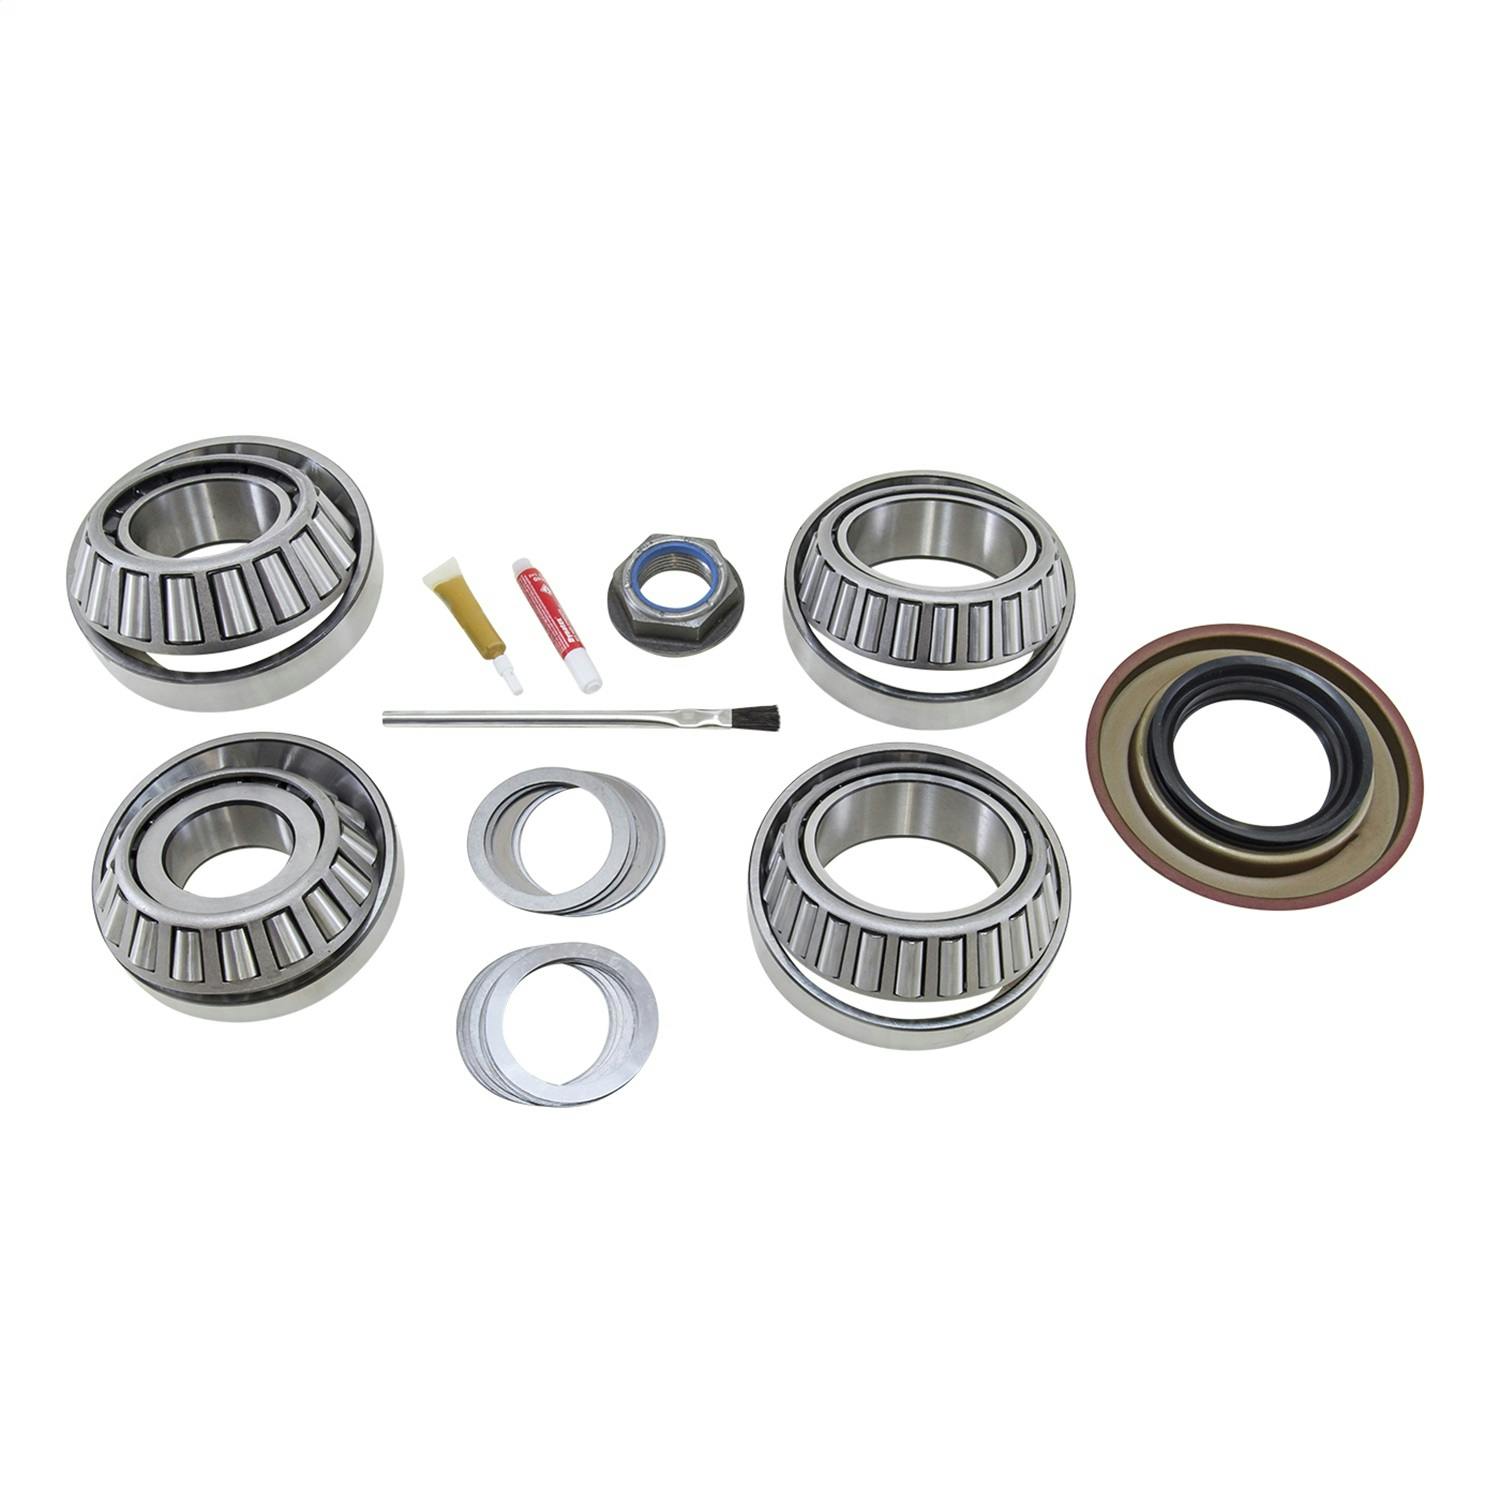 USA Standard Gear ZK DS110 Differential Rebuild Kit